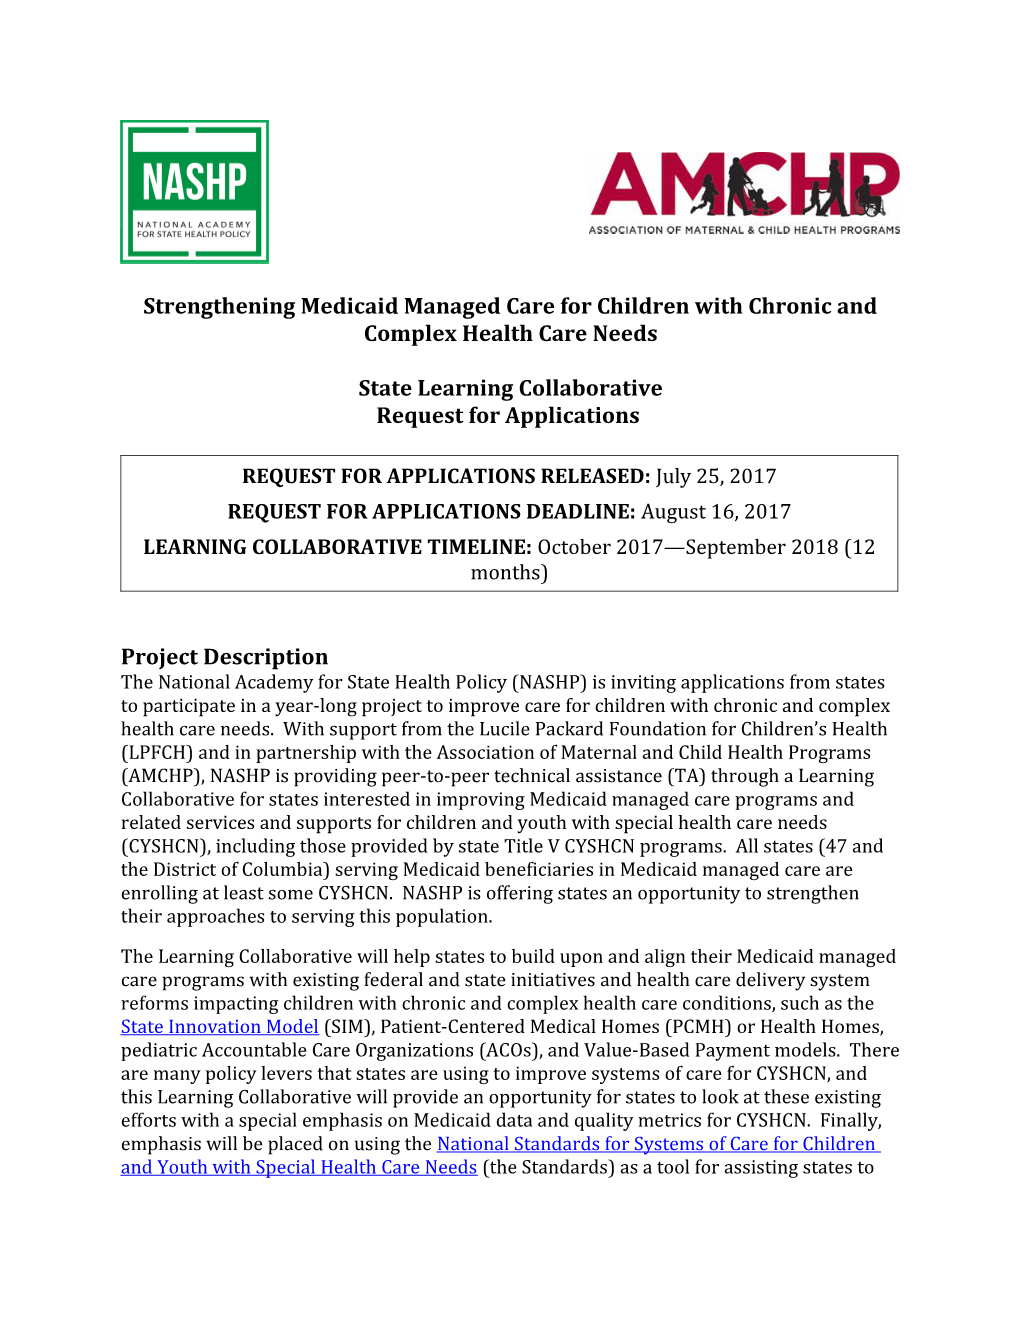 Strengthening Medicaid Managed Care for Children with Chronic and Complex Health Care Needs